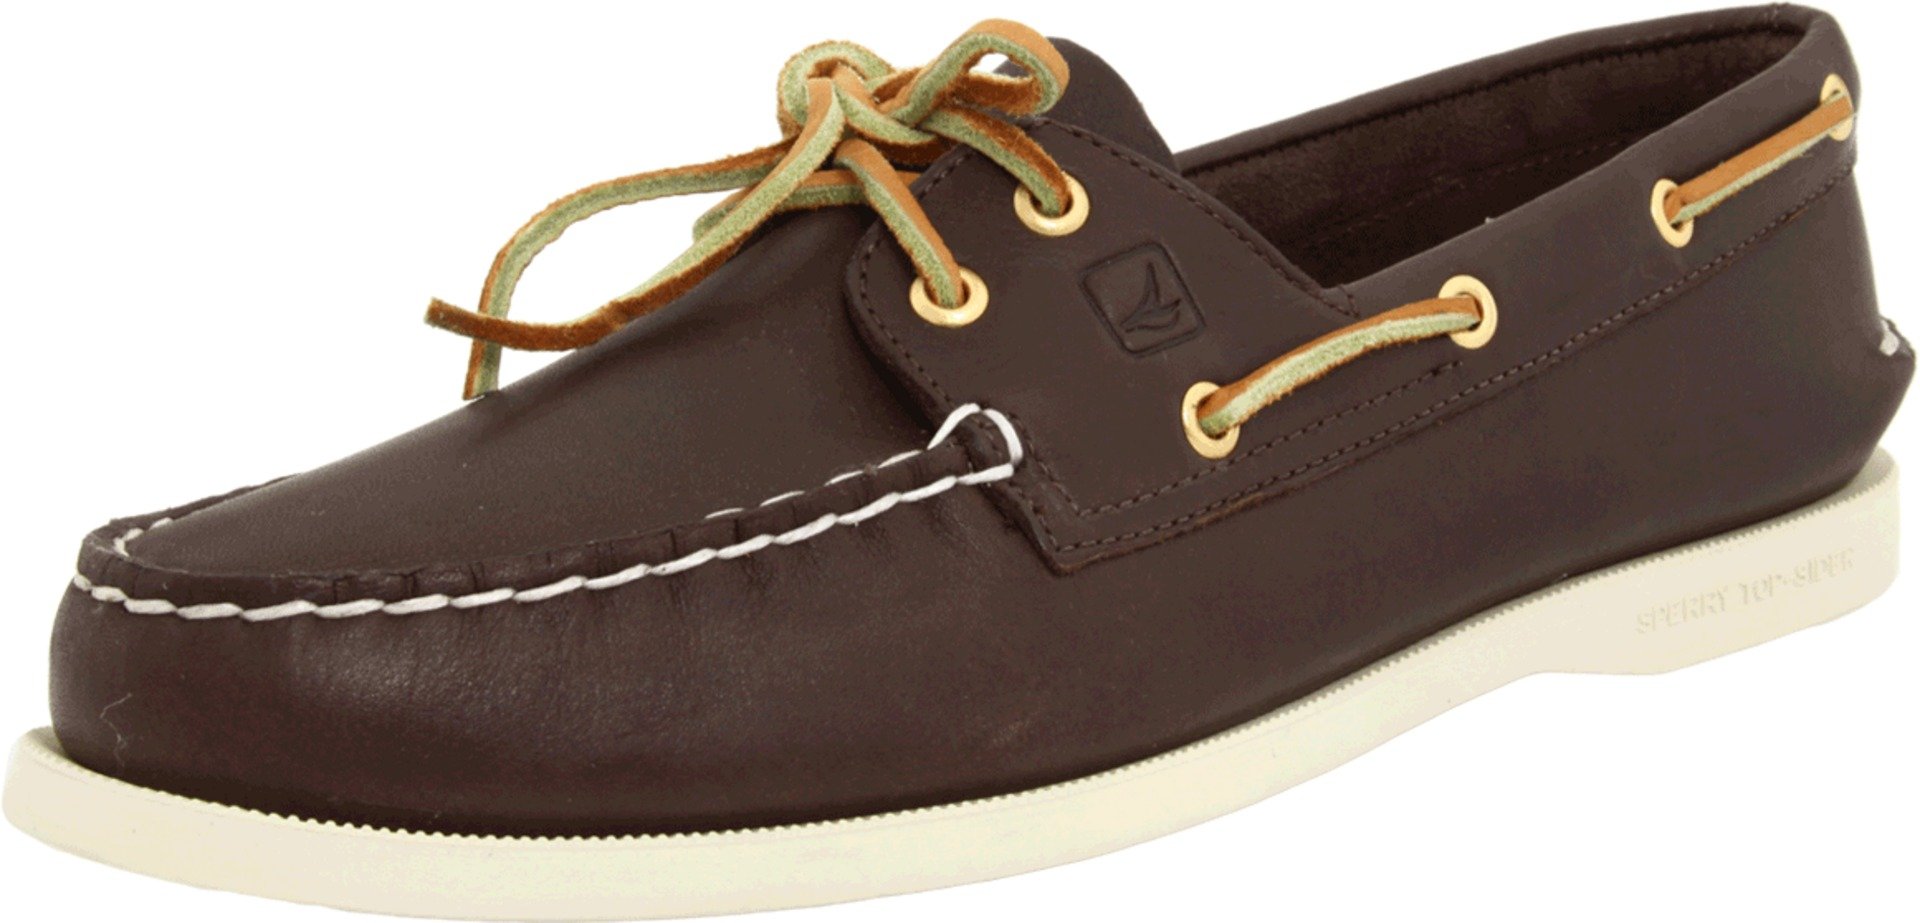 Sperry Top-Sider A/O 2-Eye Shoe - Brown - 9.5